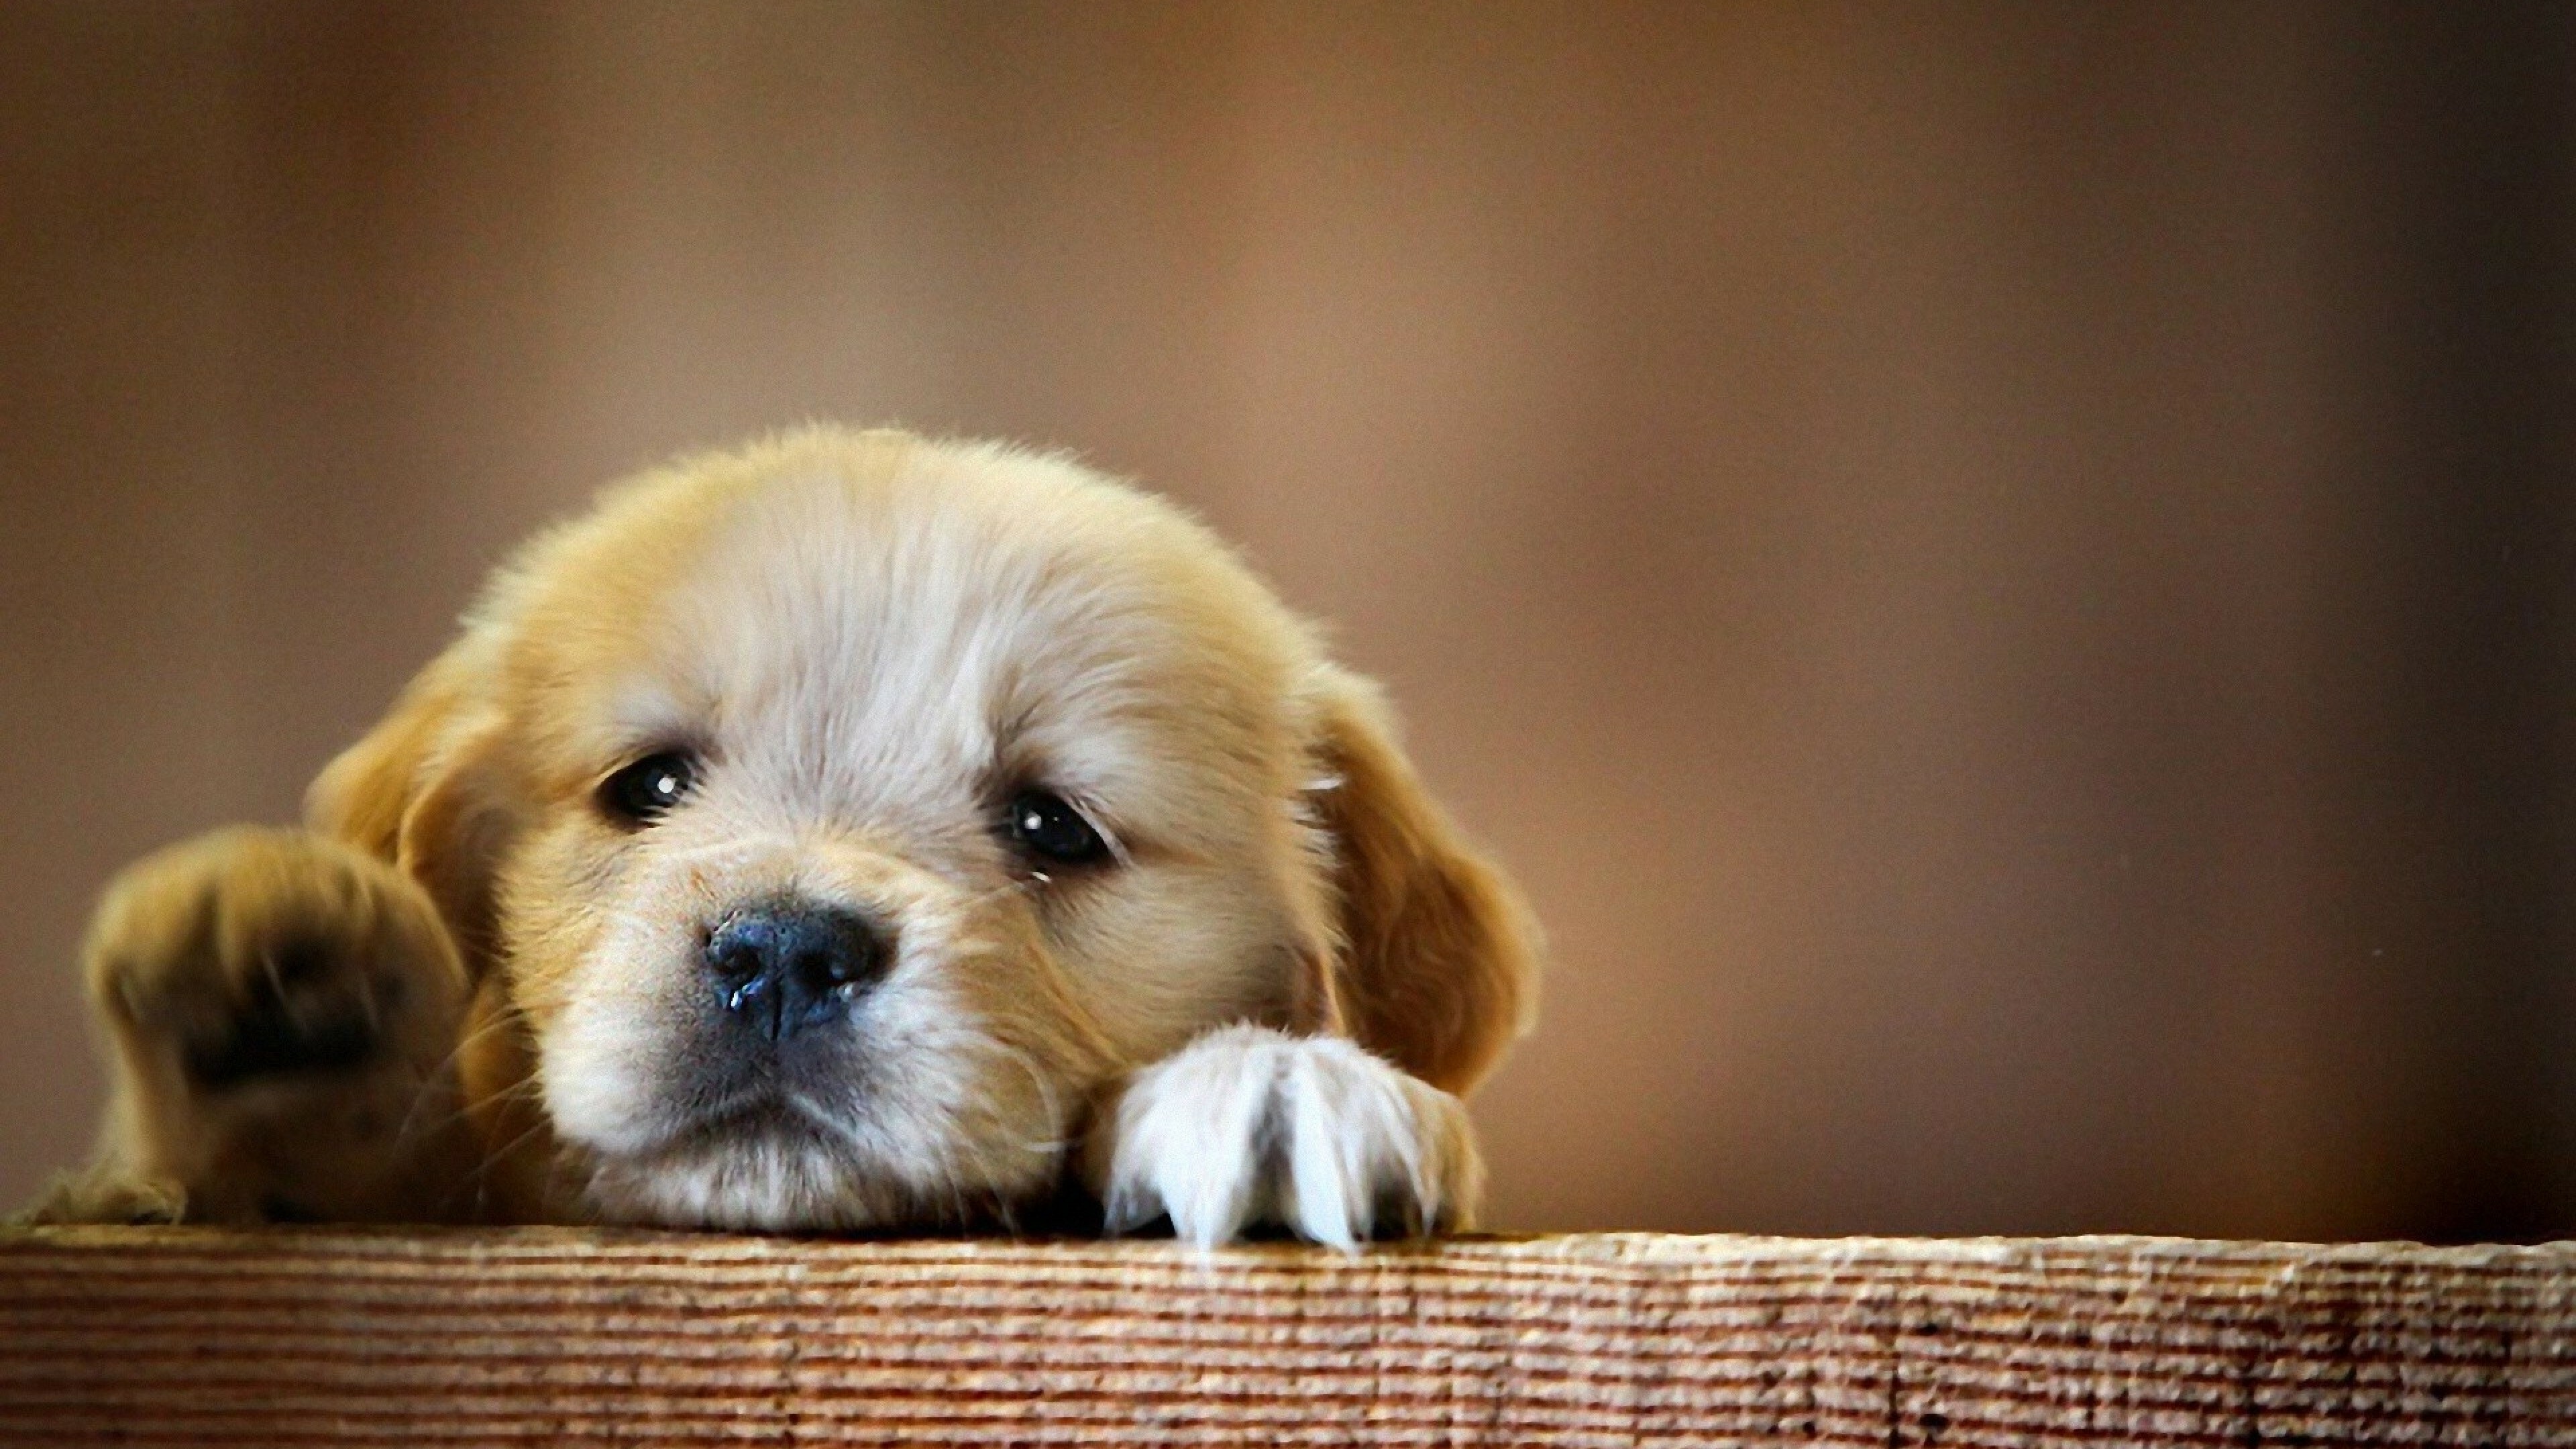 Dog: Puppy, Born after an average of 63 days of gestation. 3840x2160 4K Wallpaper.